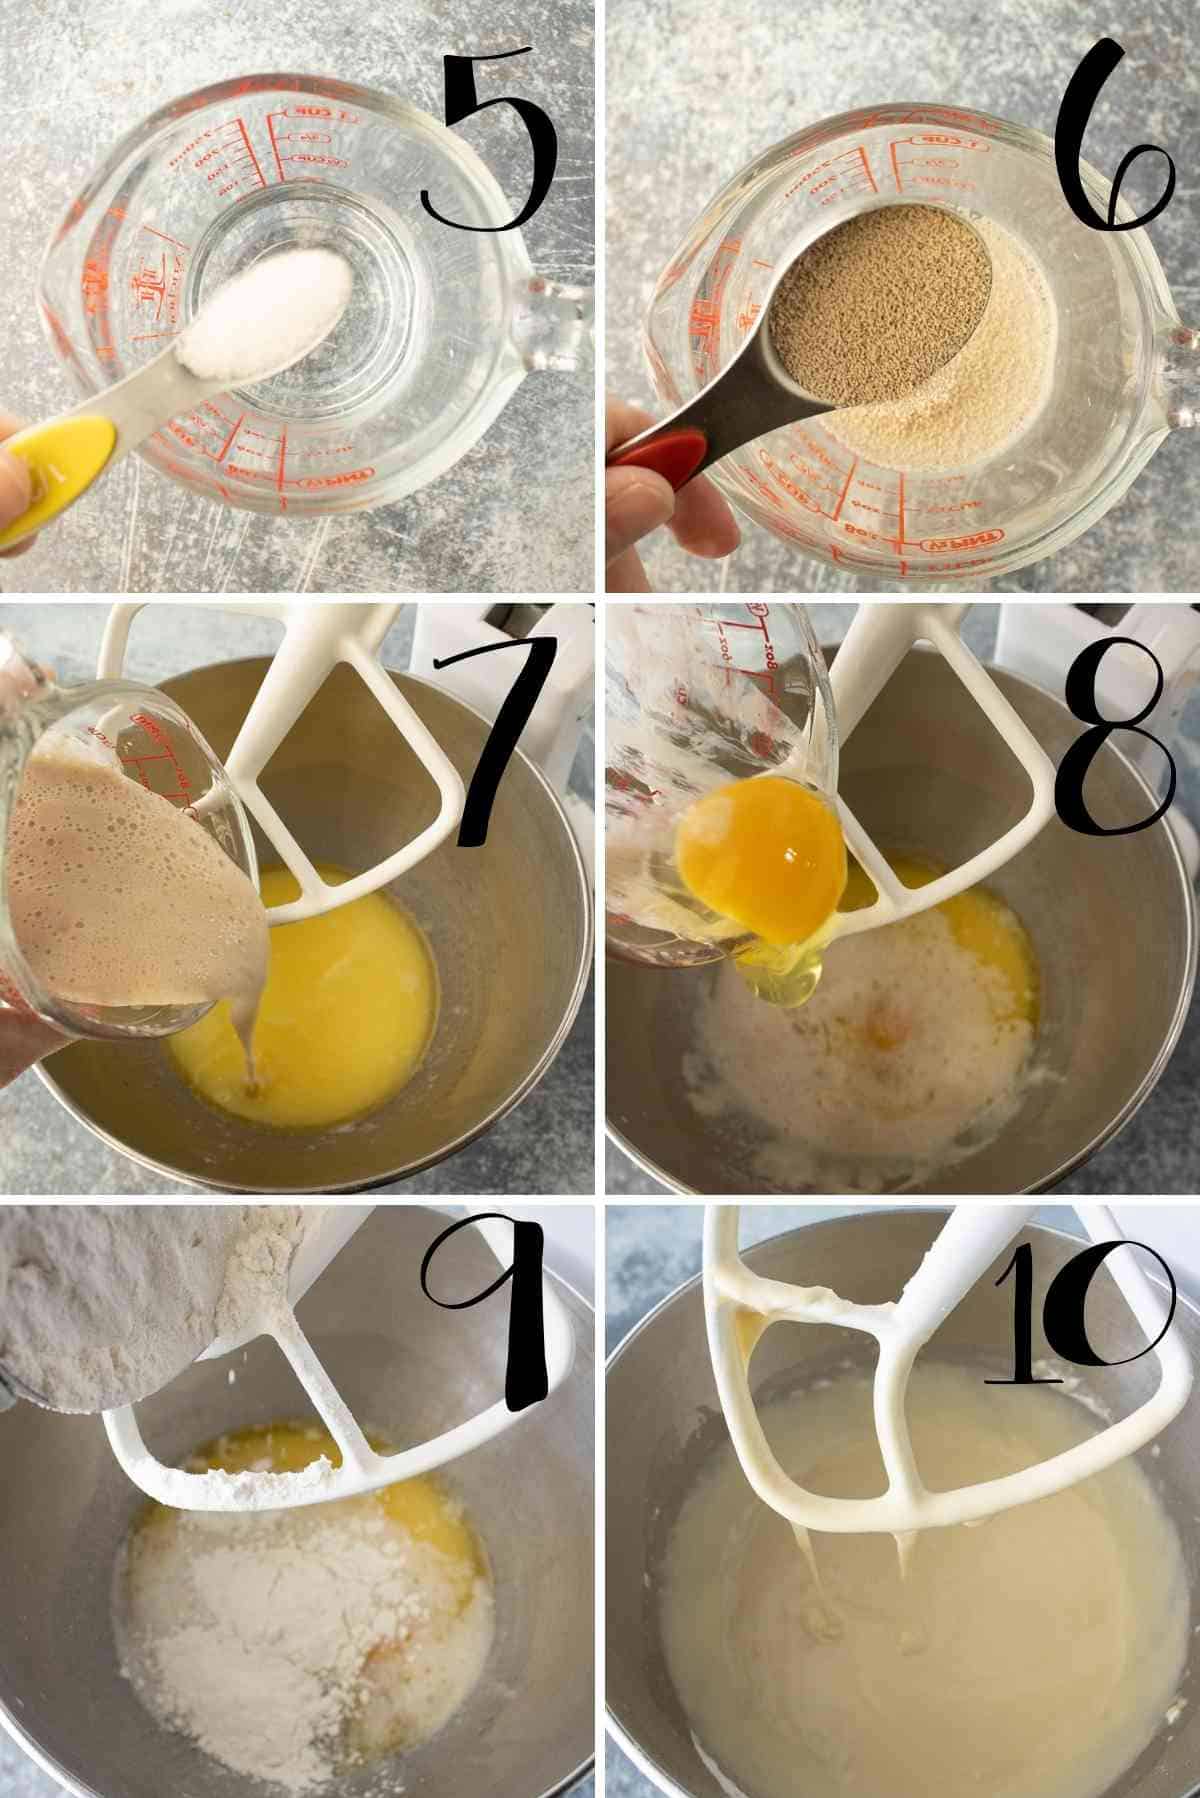 Yeast activated and added to milk mixture with eggs and part of the flour then beaten well for 5 minutes.